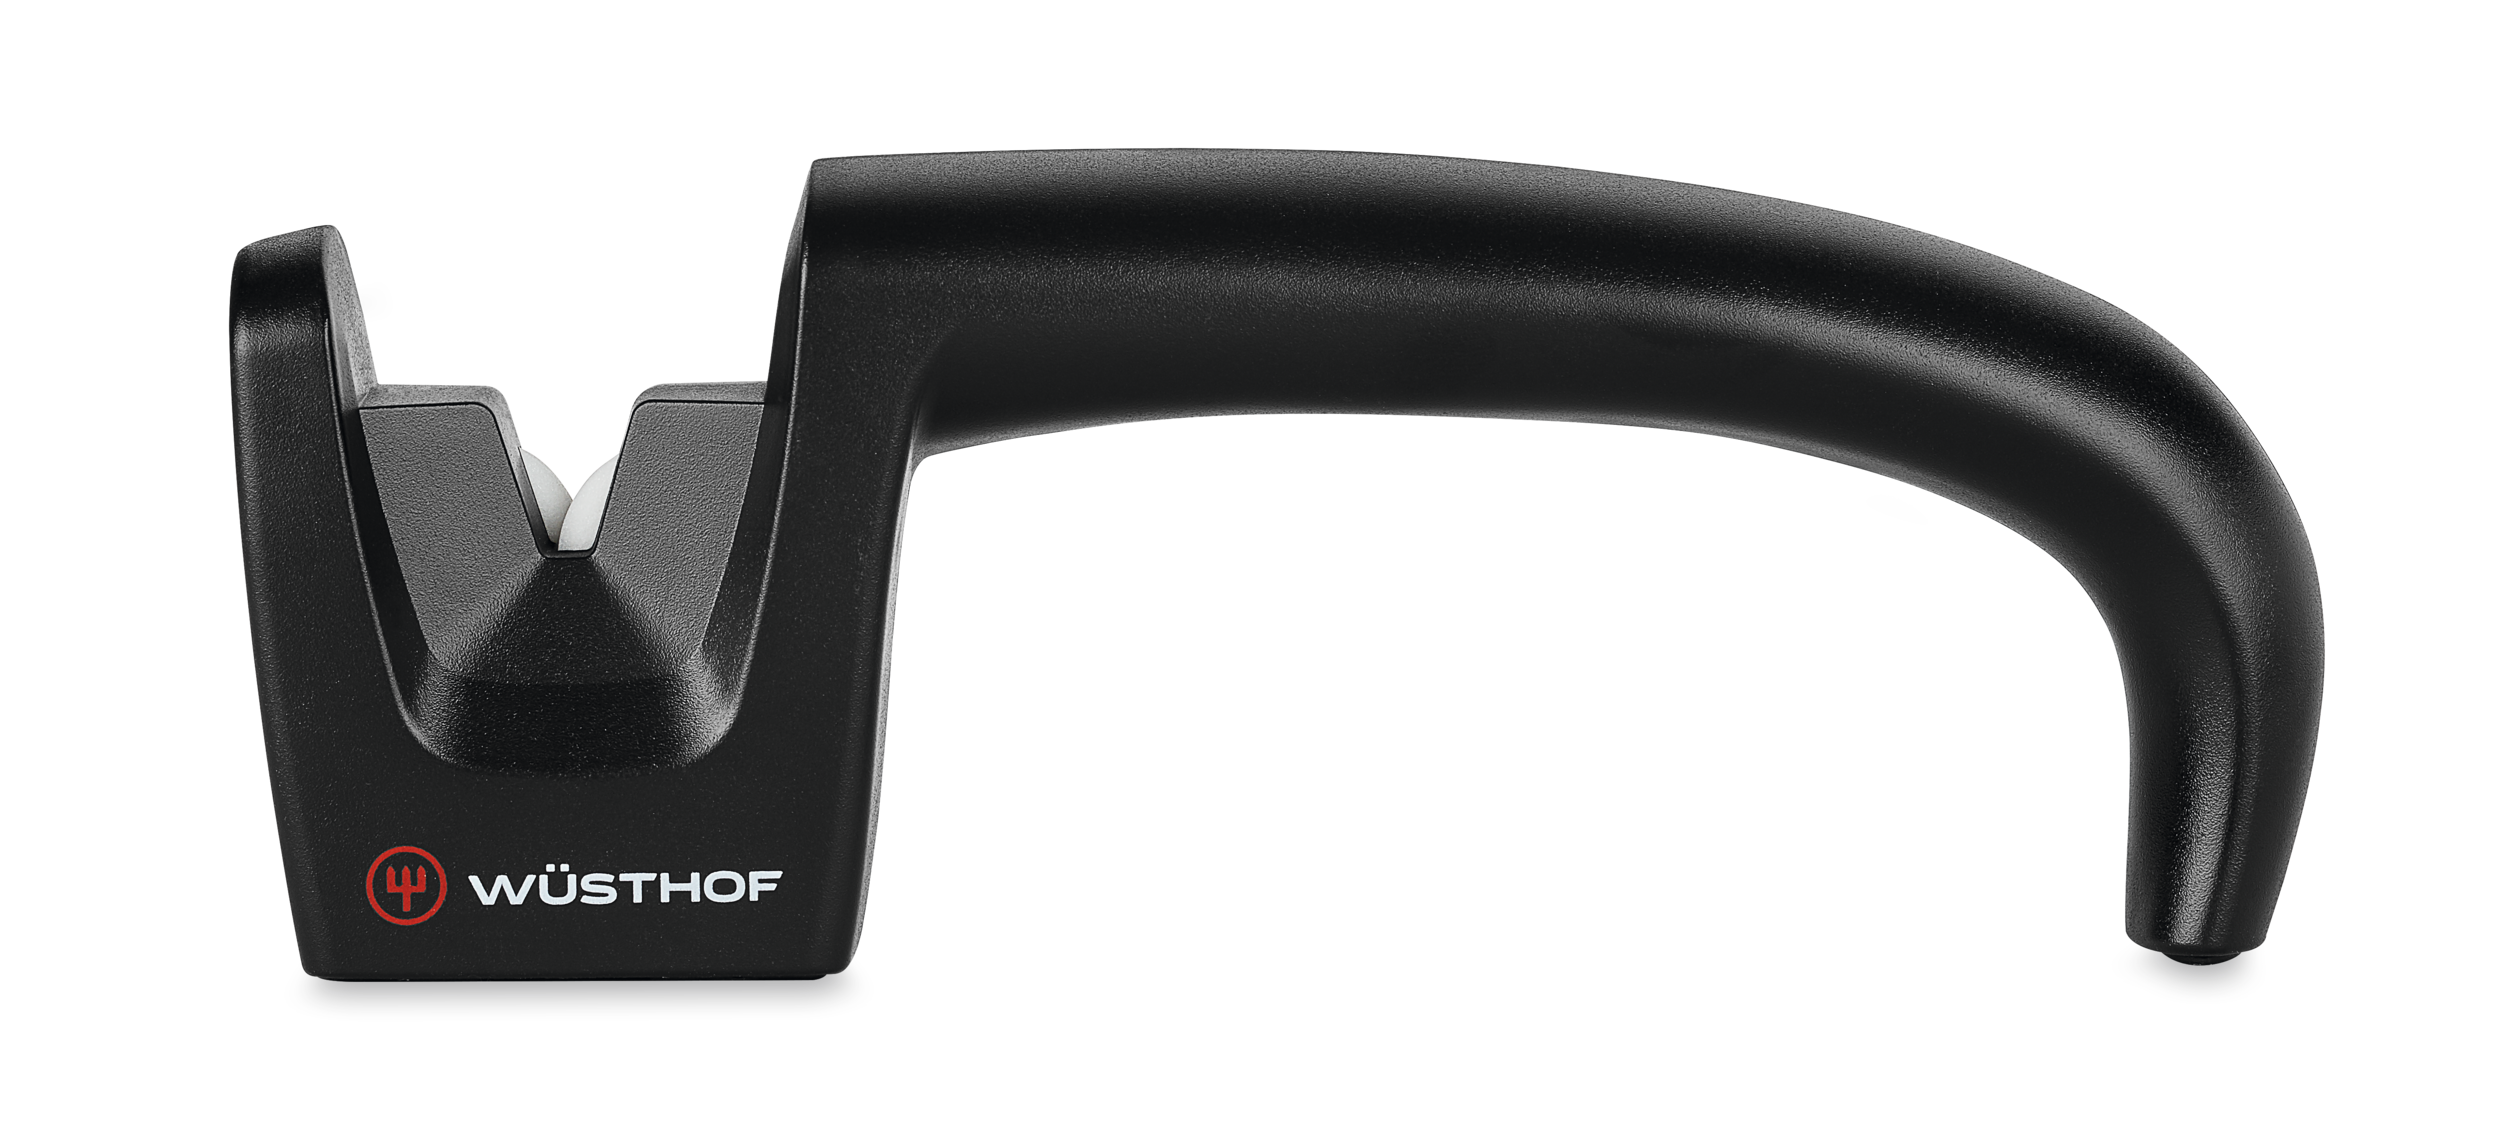 How To Sharpen Knives On Wusthof Hand Held Sharpeners 